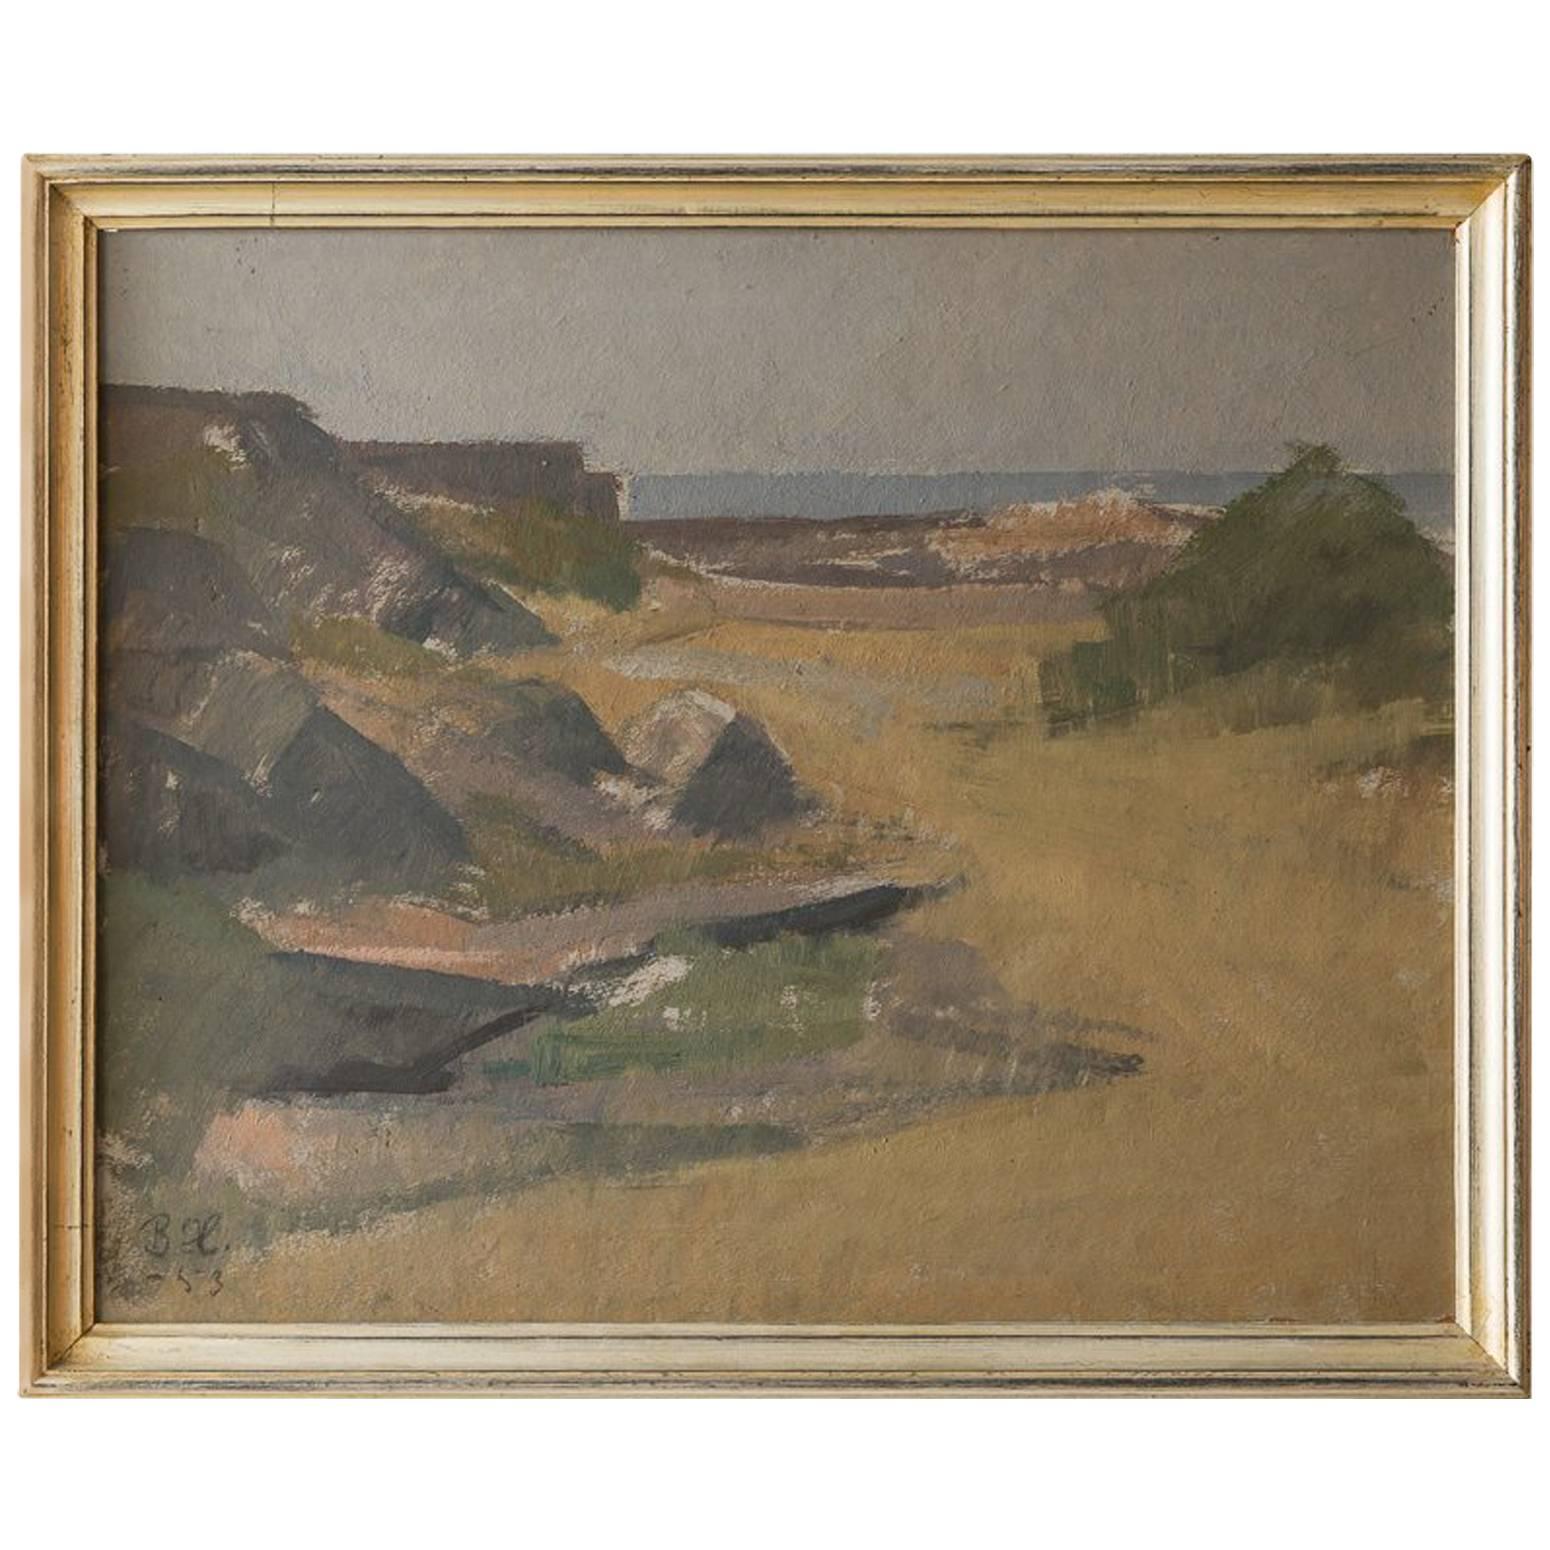 Vintage Landscape Painting by the Sea